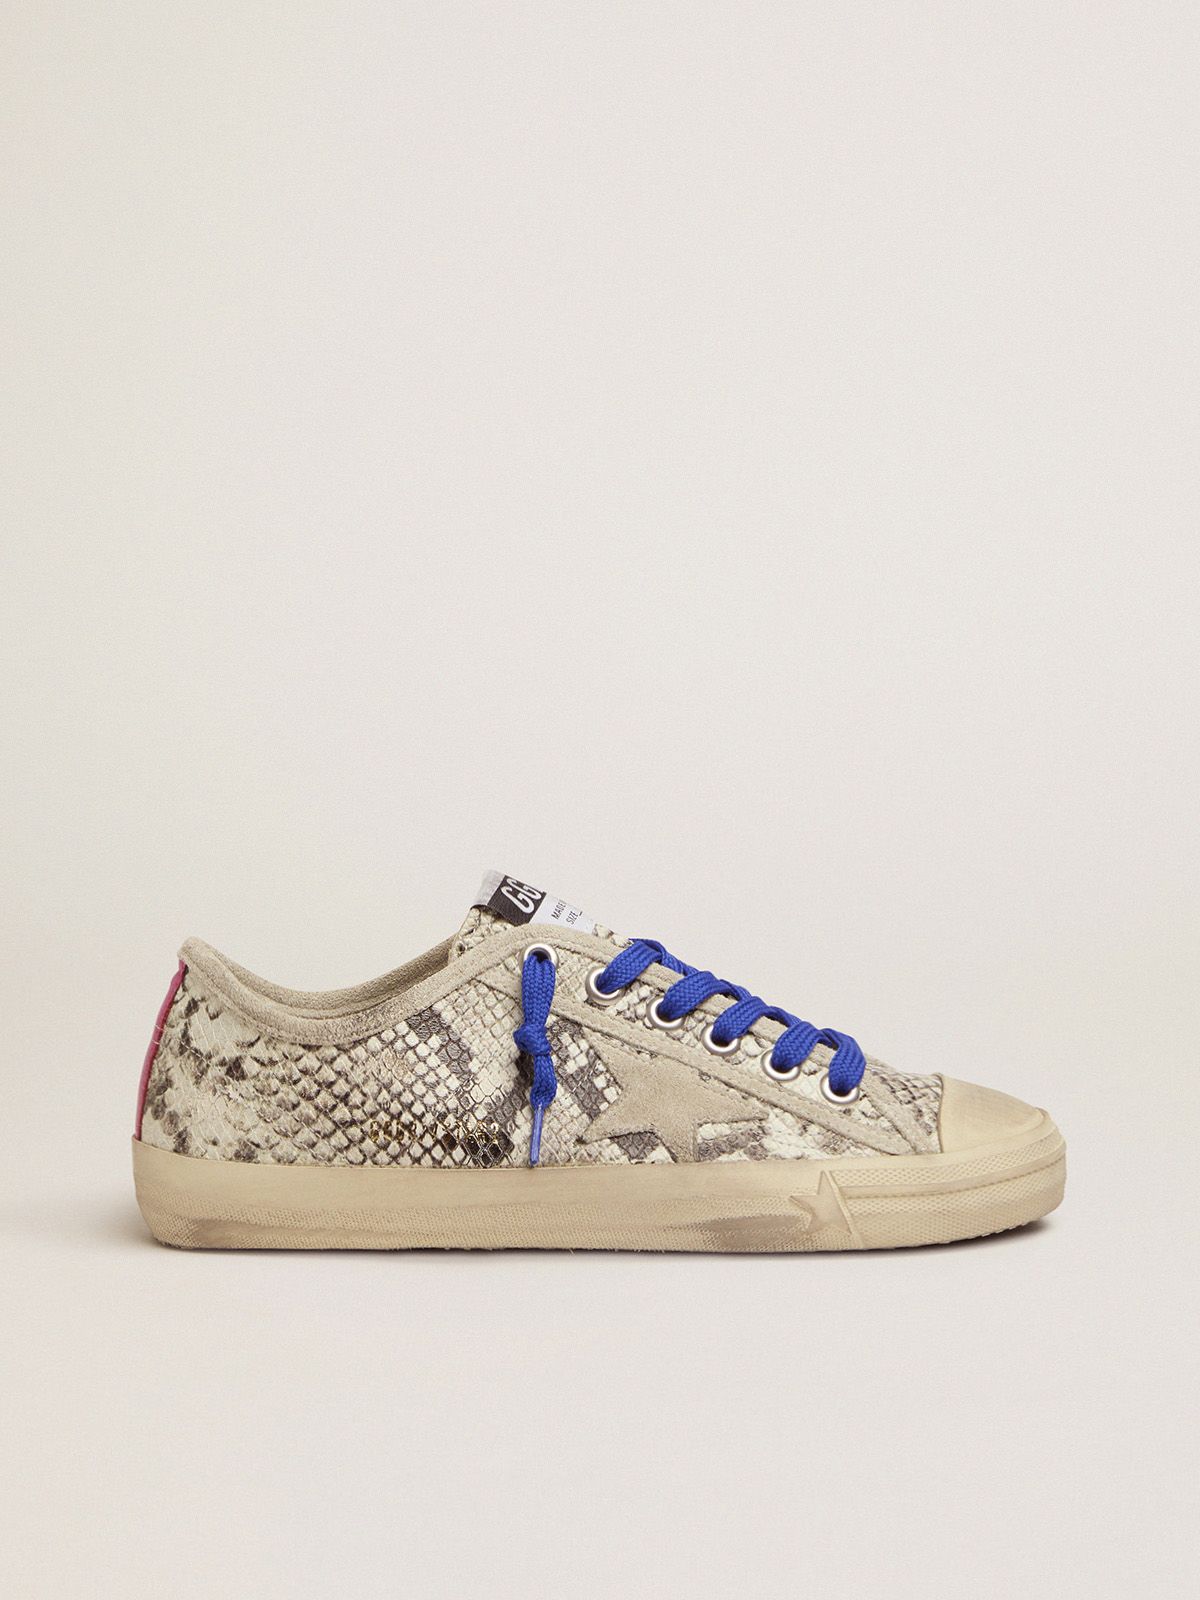 golden goose insert fuchsia in V-Star sneakers snake-print with leather